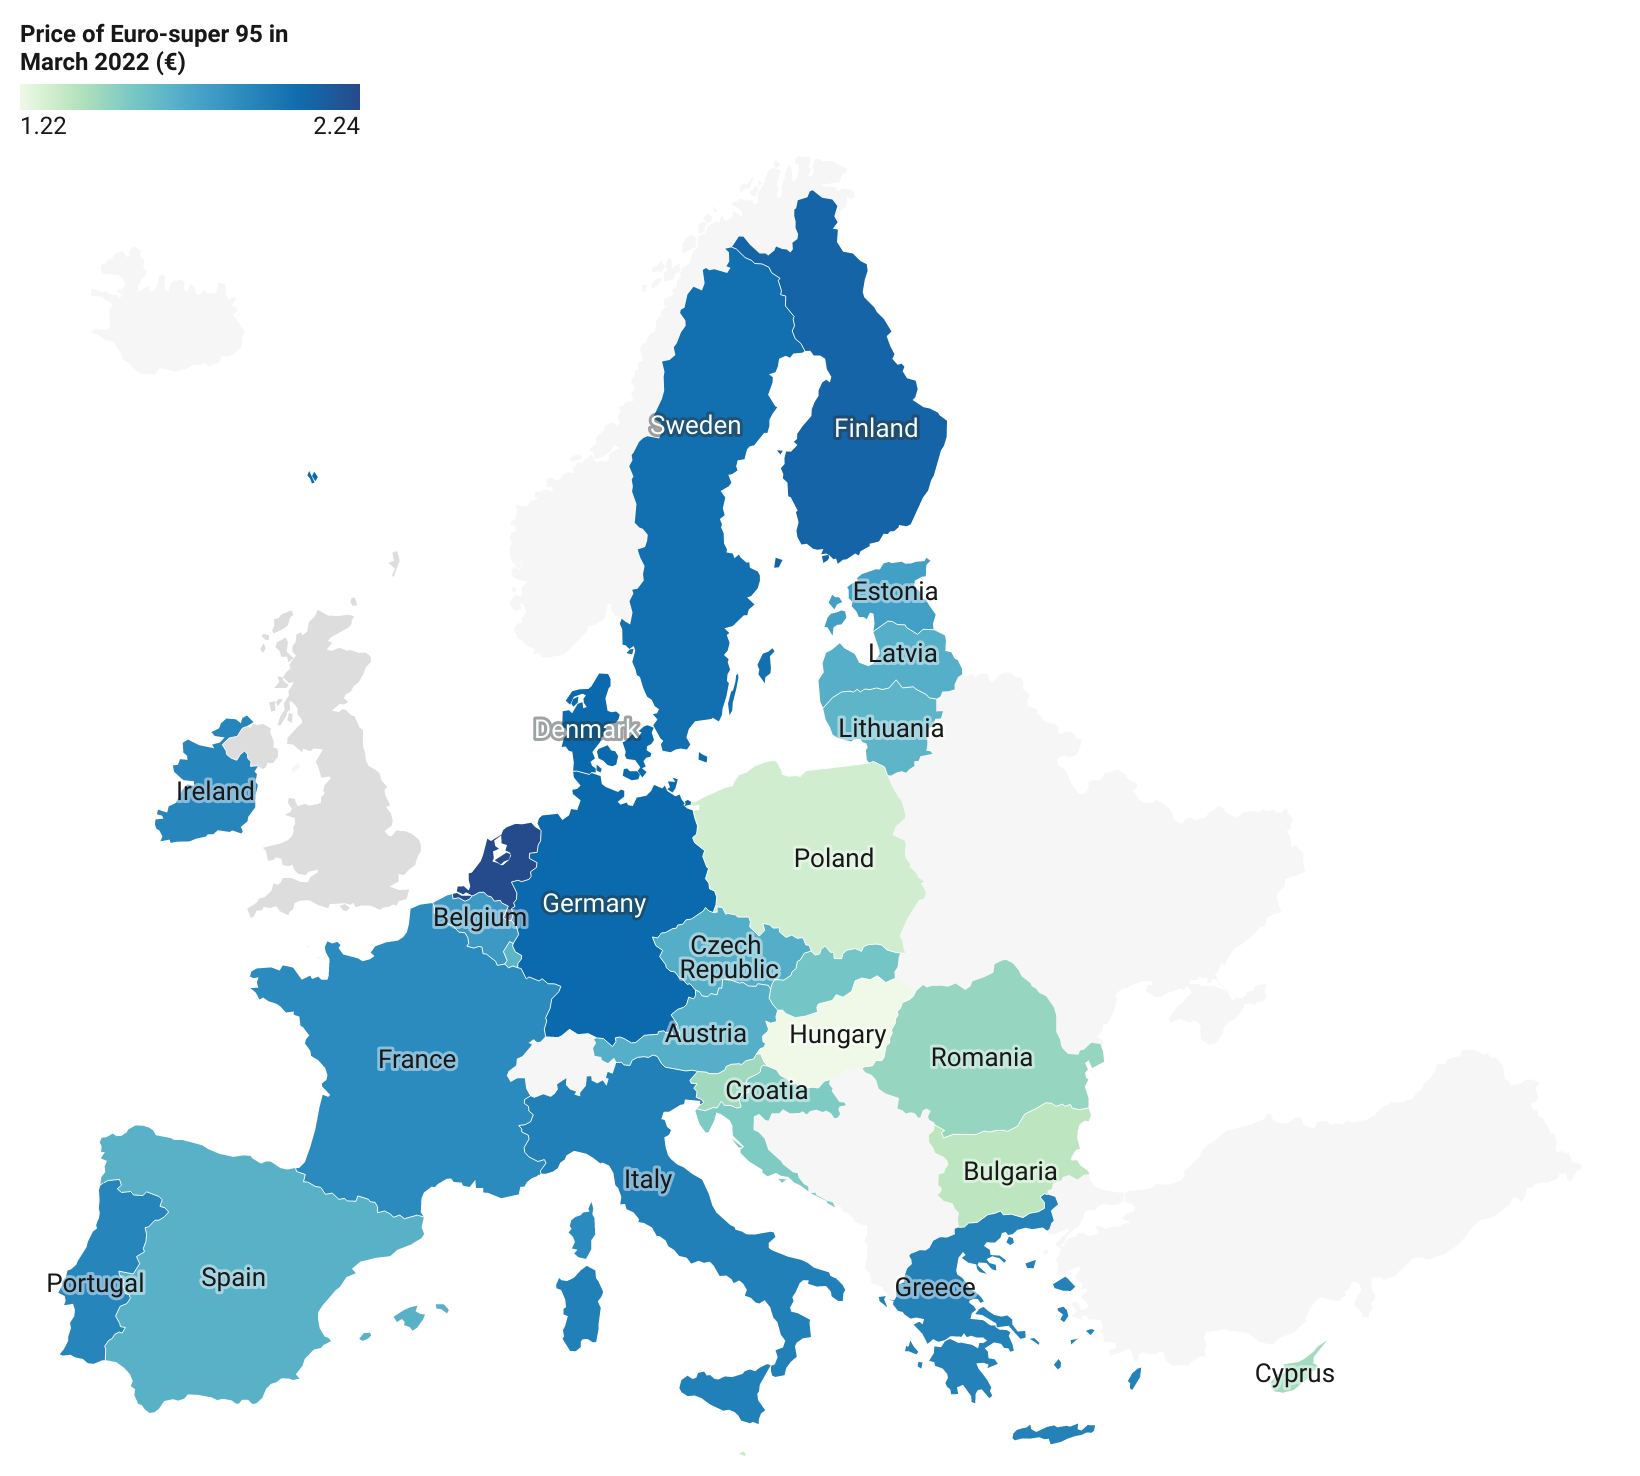 A choropleth map showing the price of gasoline in the countries of the EU